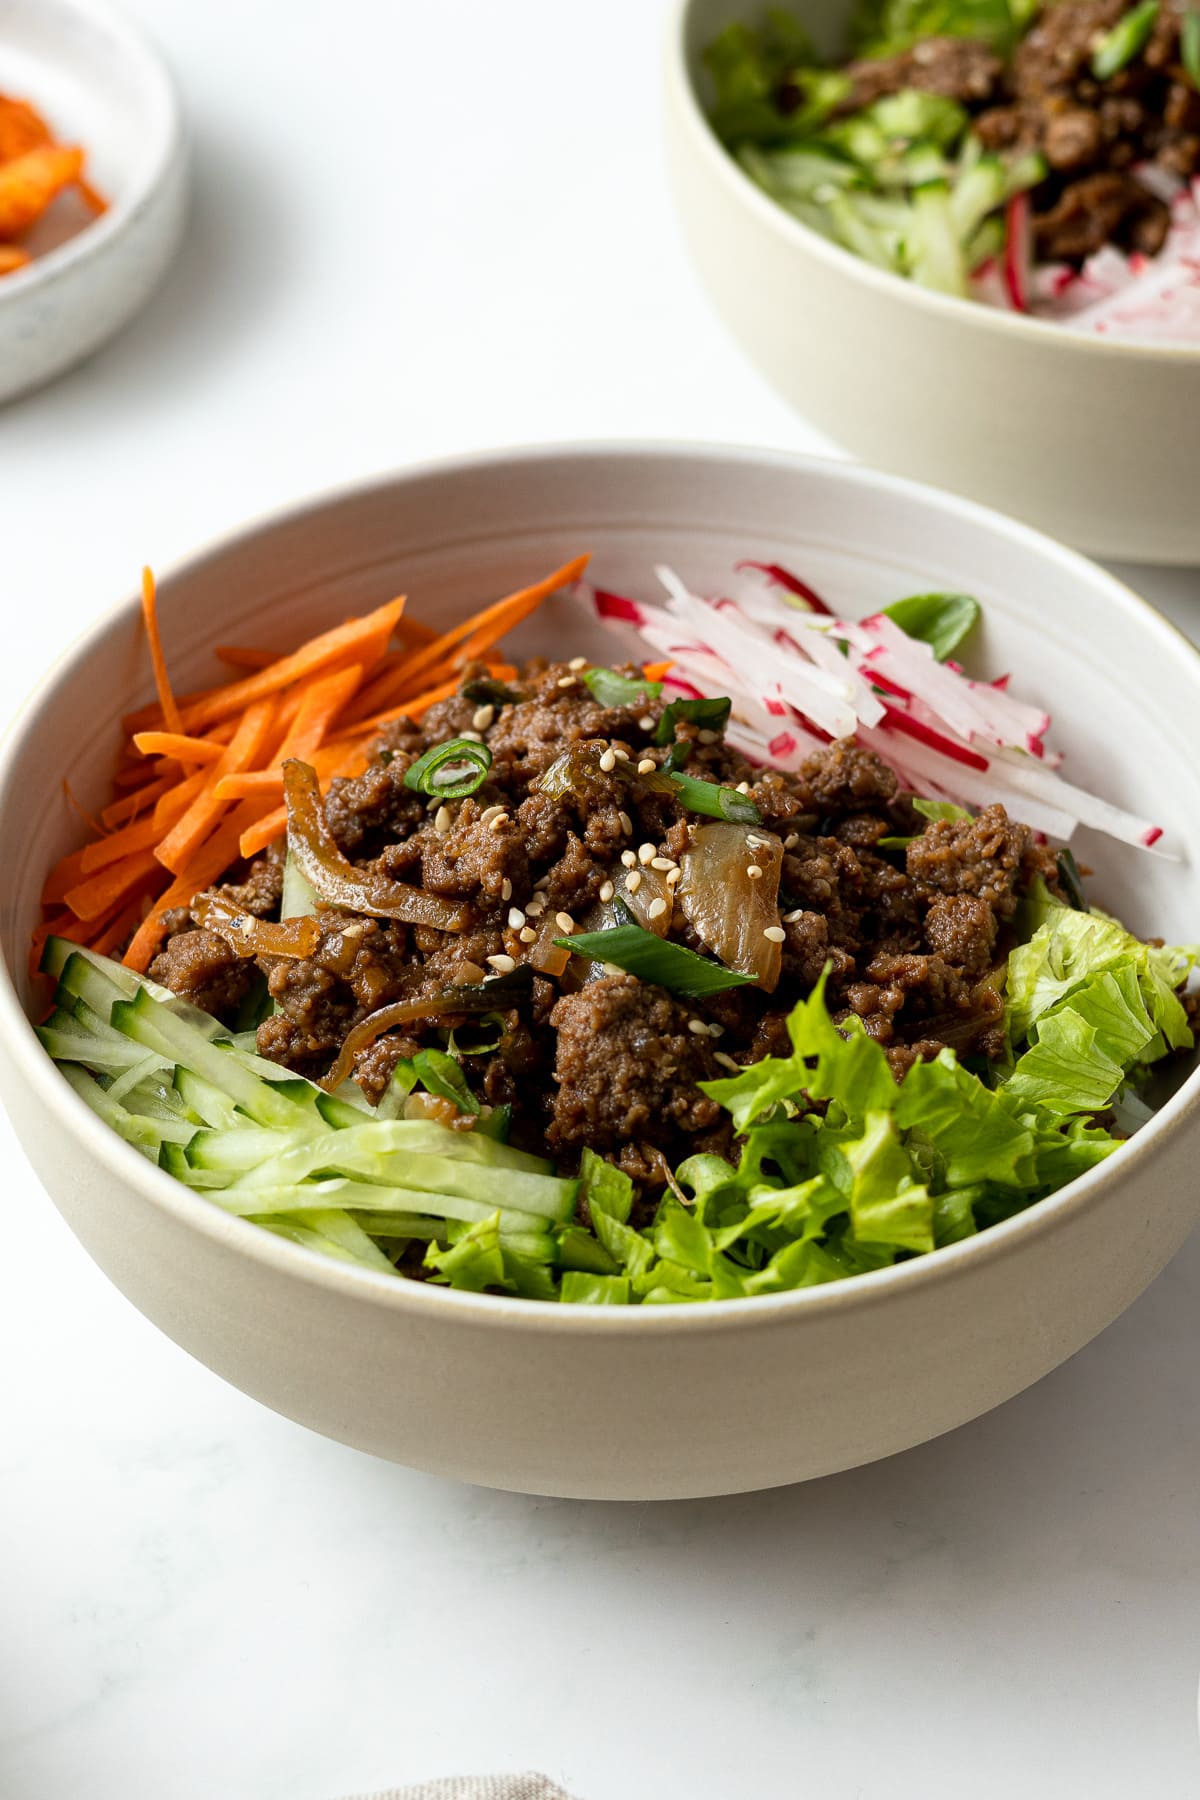 ground beef bulgogi with julienned carrots, radishes, cucumber, and salad served over rice in a bowl